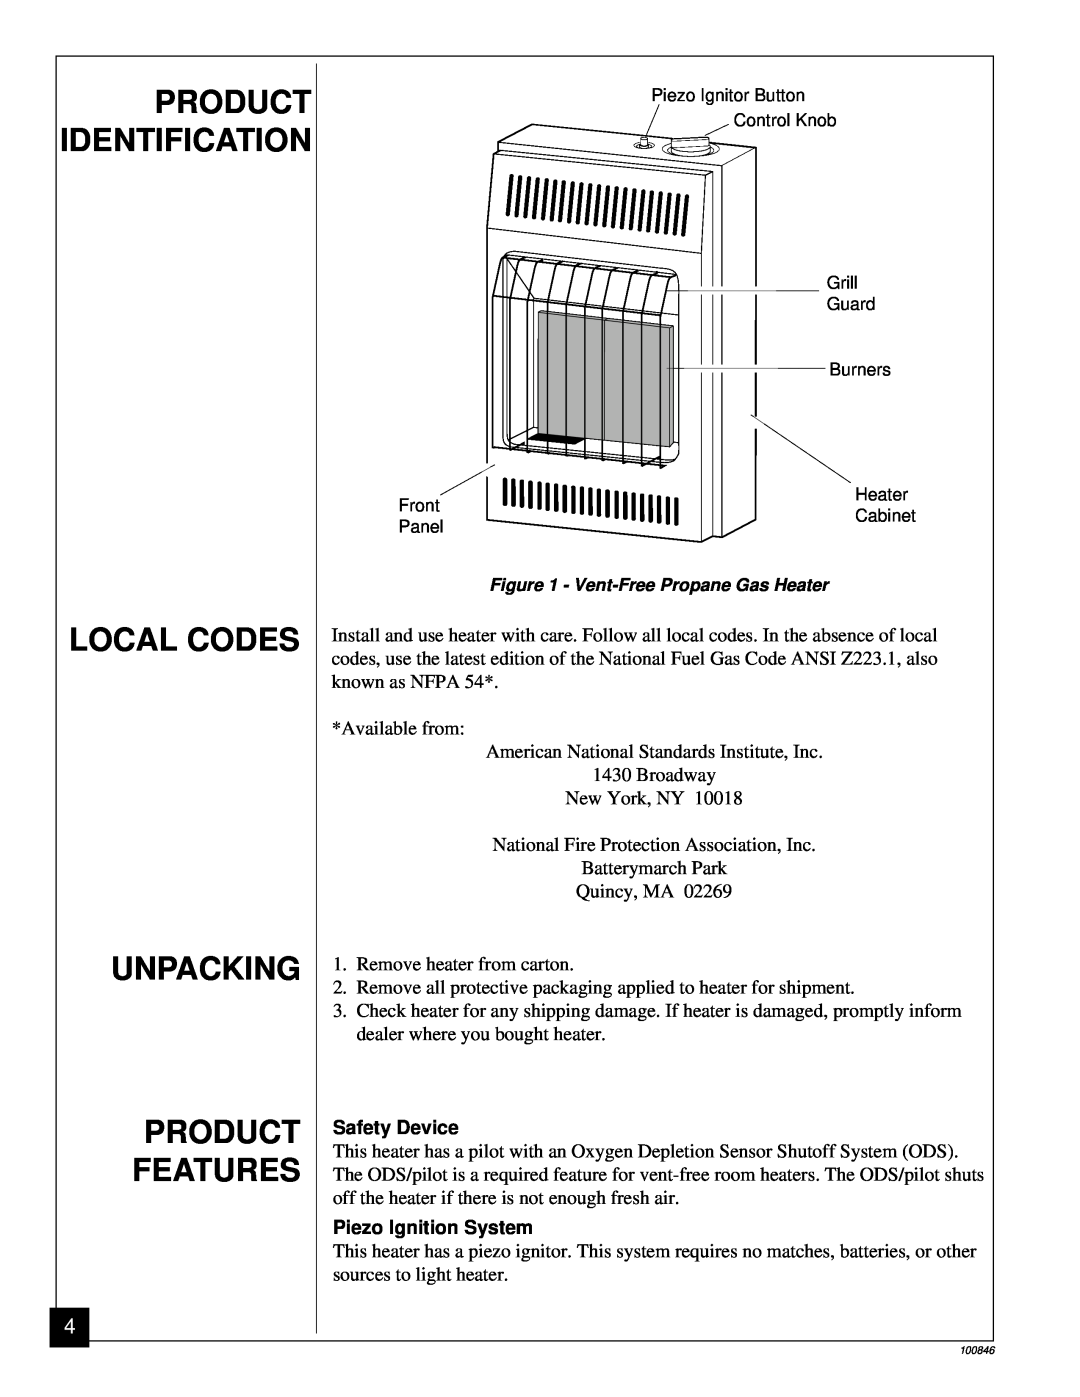 Desa CGP11A installation manual Product, Local Codes, Unpacking, Identification, Features 